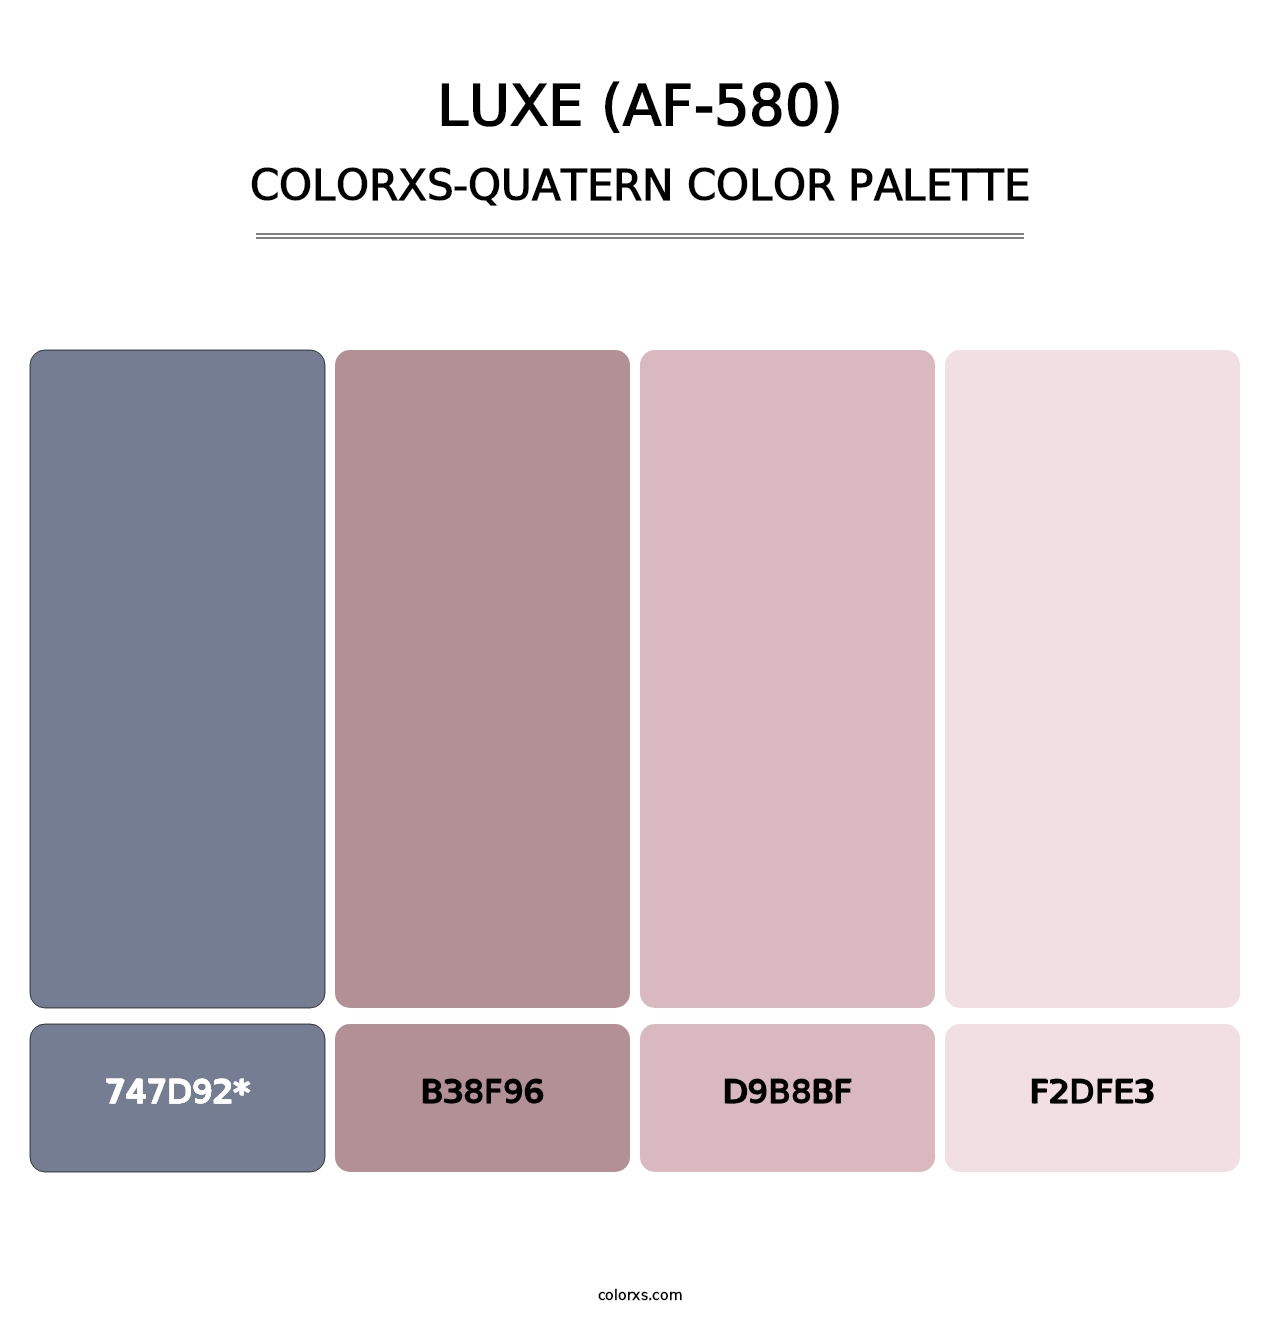 Luxe (AF-580) - Colorxs Quatern Palette